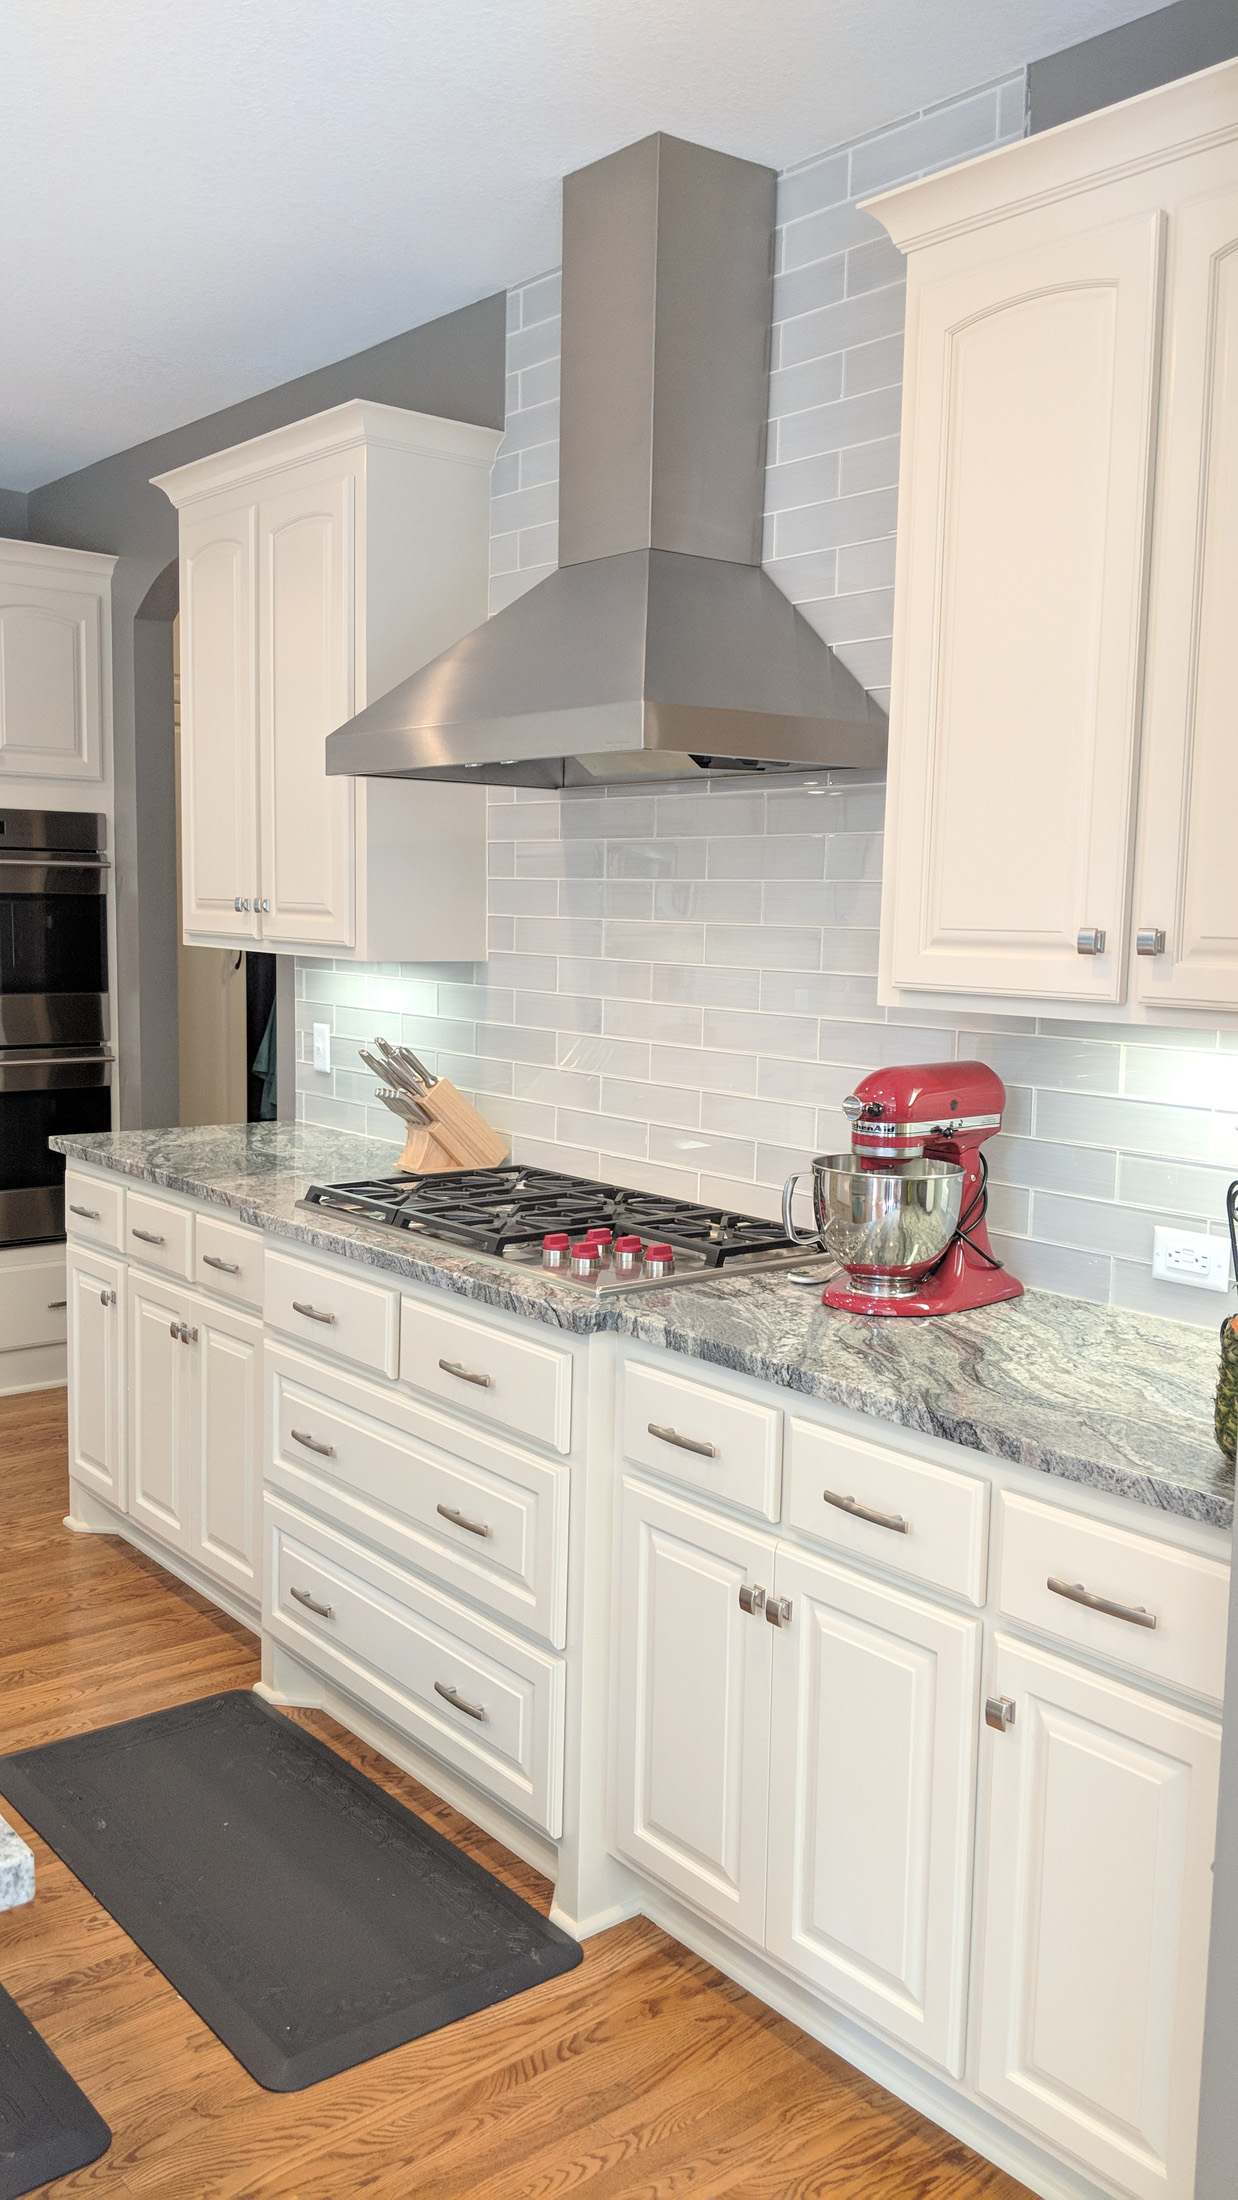 After - kitchen range wall new Granite tops  W/ glass subway tile